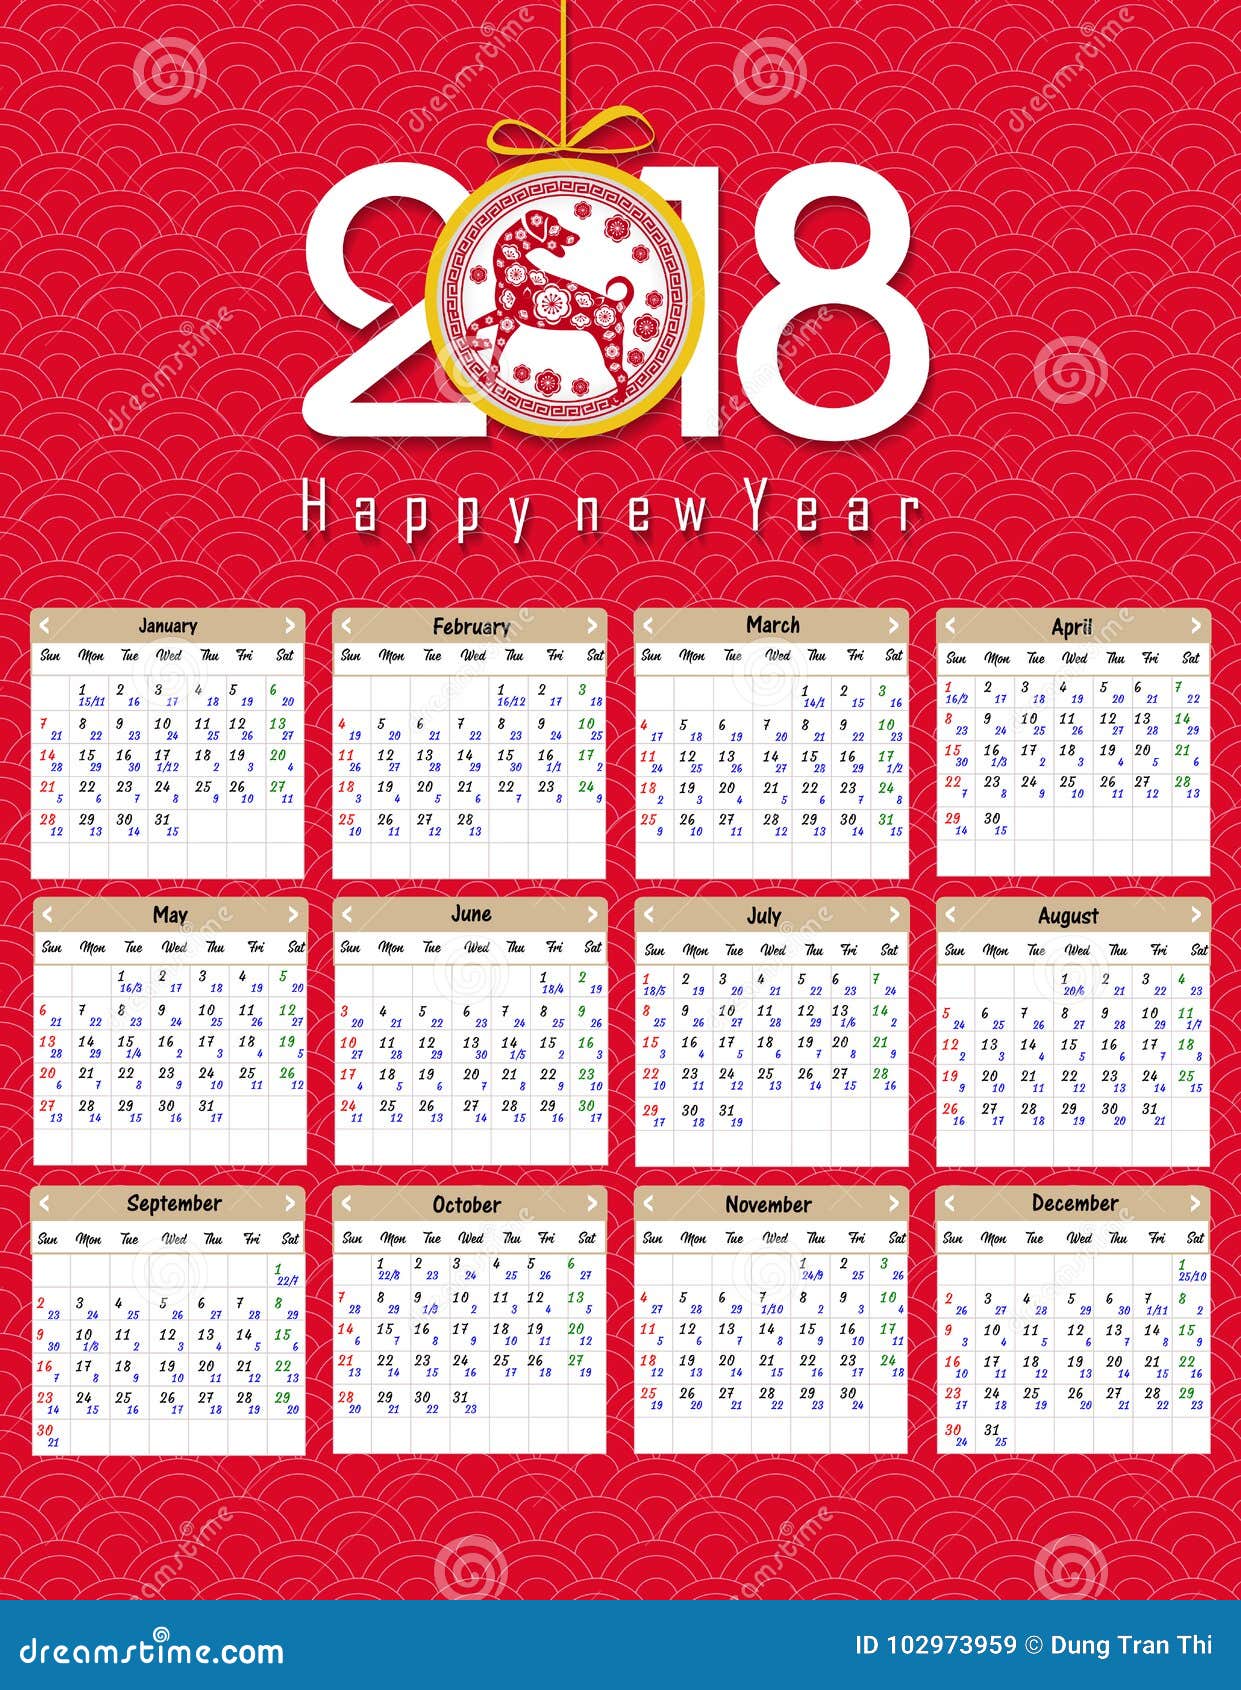 Lunar Calendar Chinese Calendar For Happy New Year 2018 Year Of The Dog Stock Vector Illustration Of June April 102973959